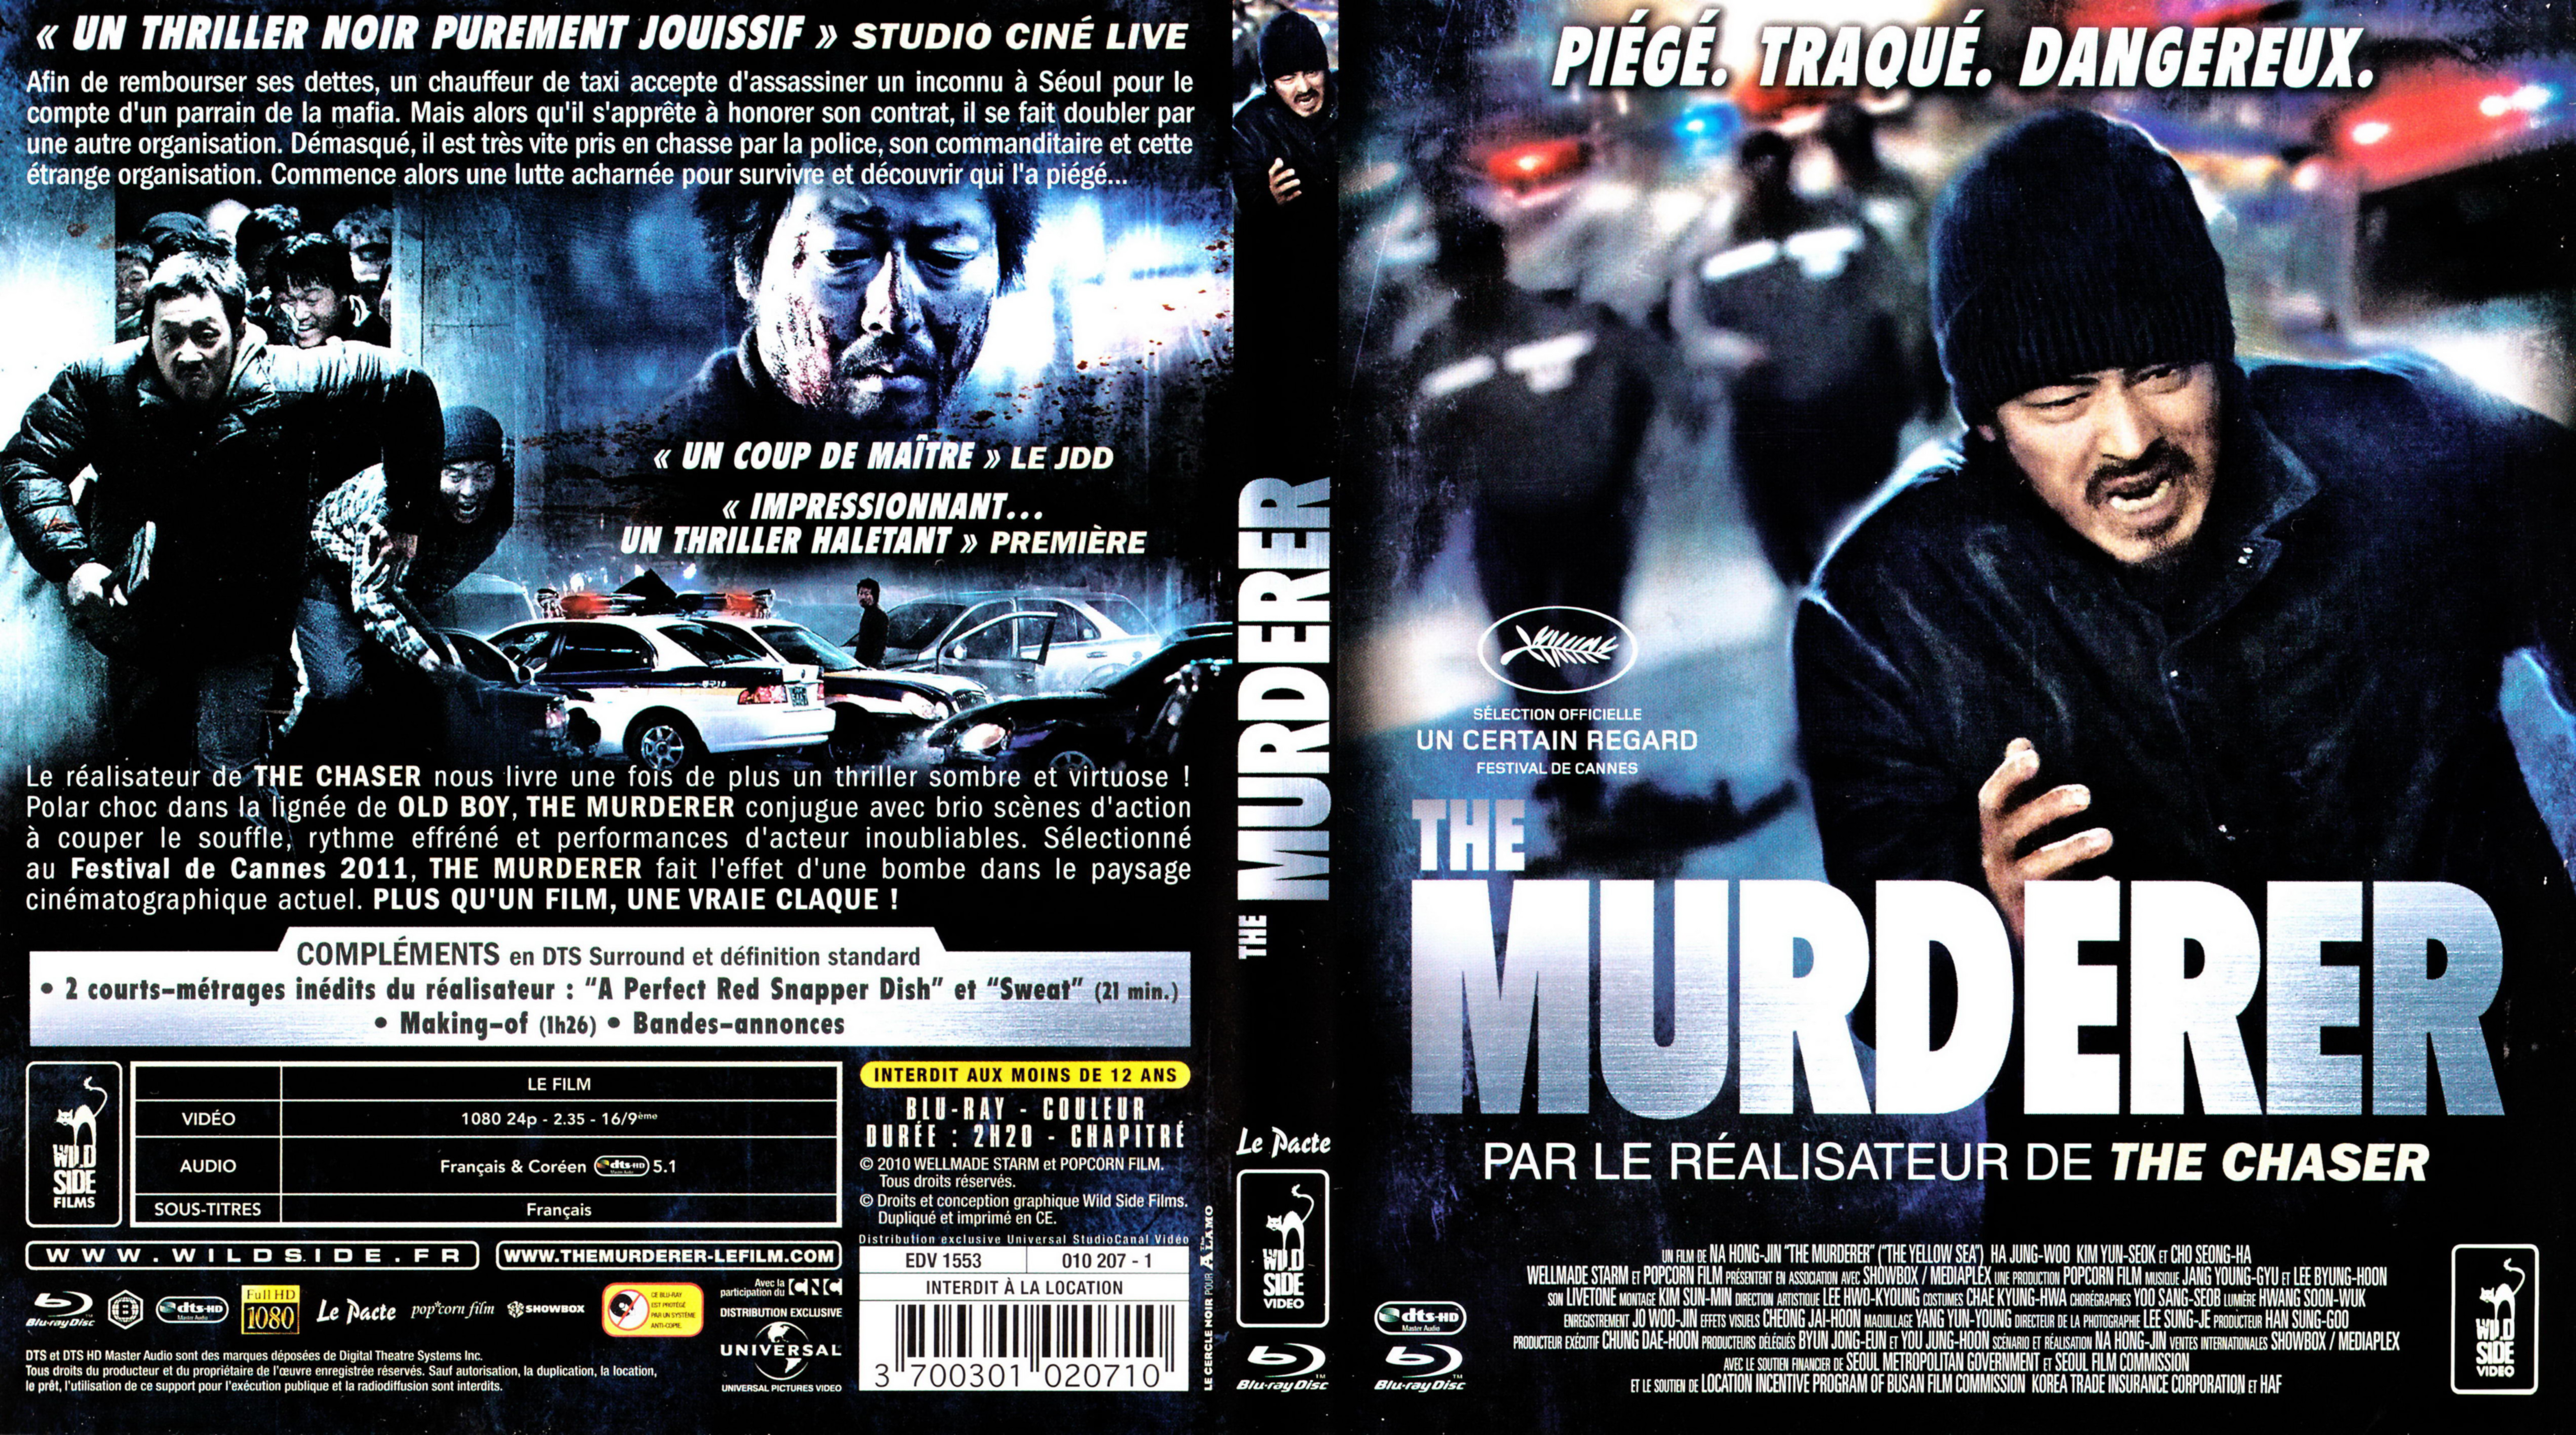 Jaquette DVD The Murderer (BLU-RAY)